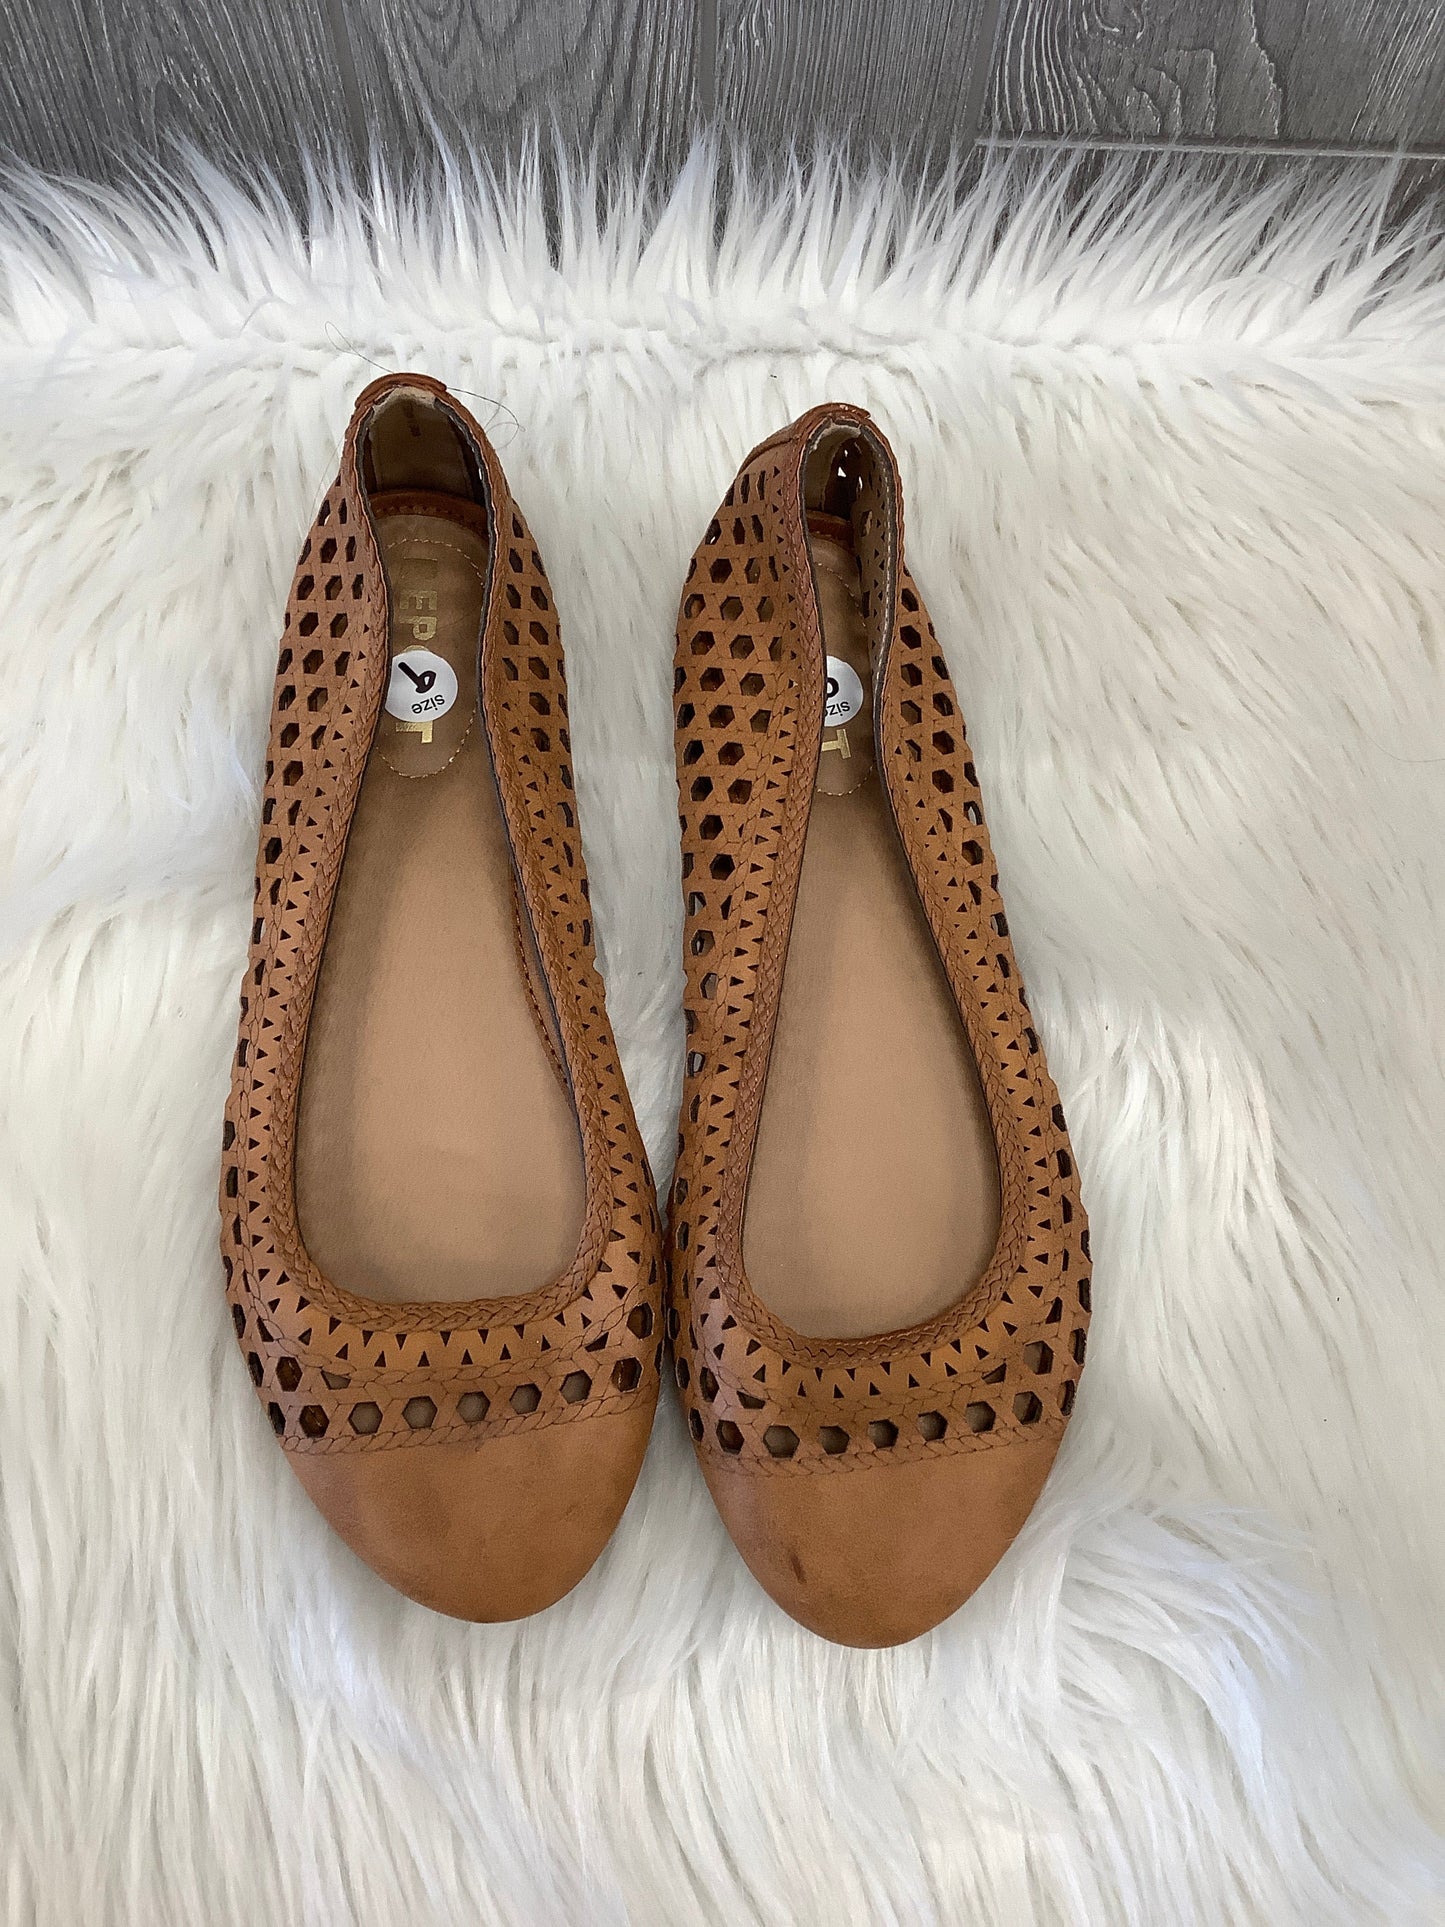 Shoes Flats By Report  Size: 9